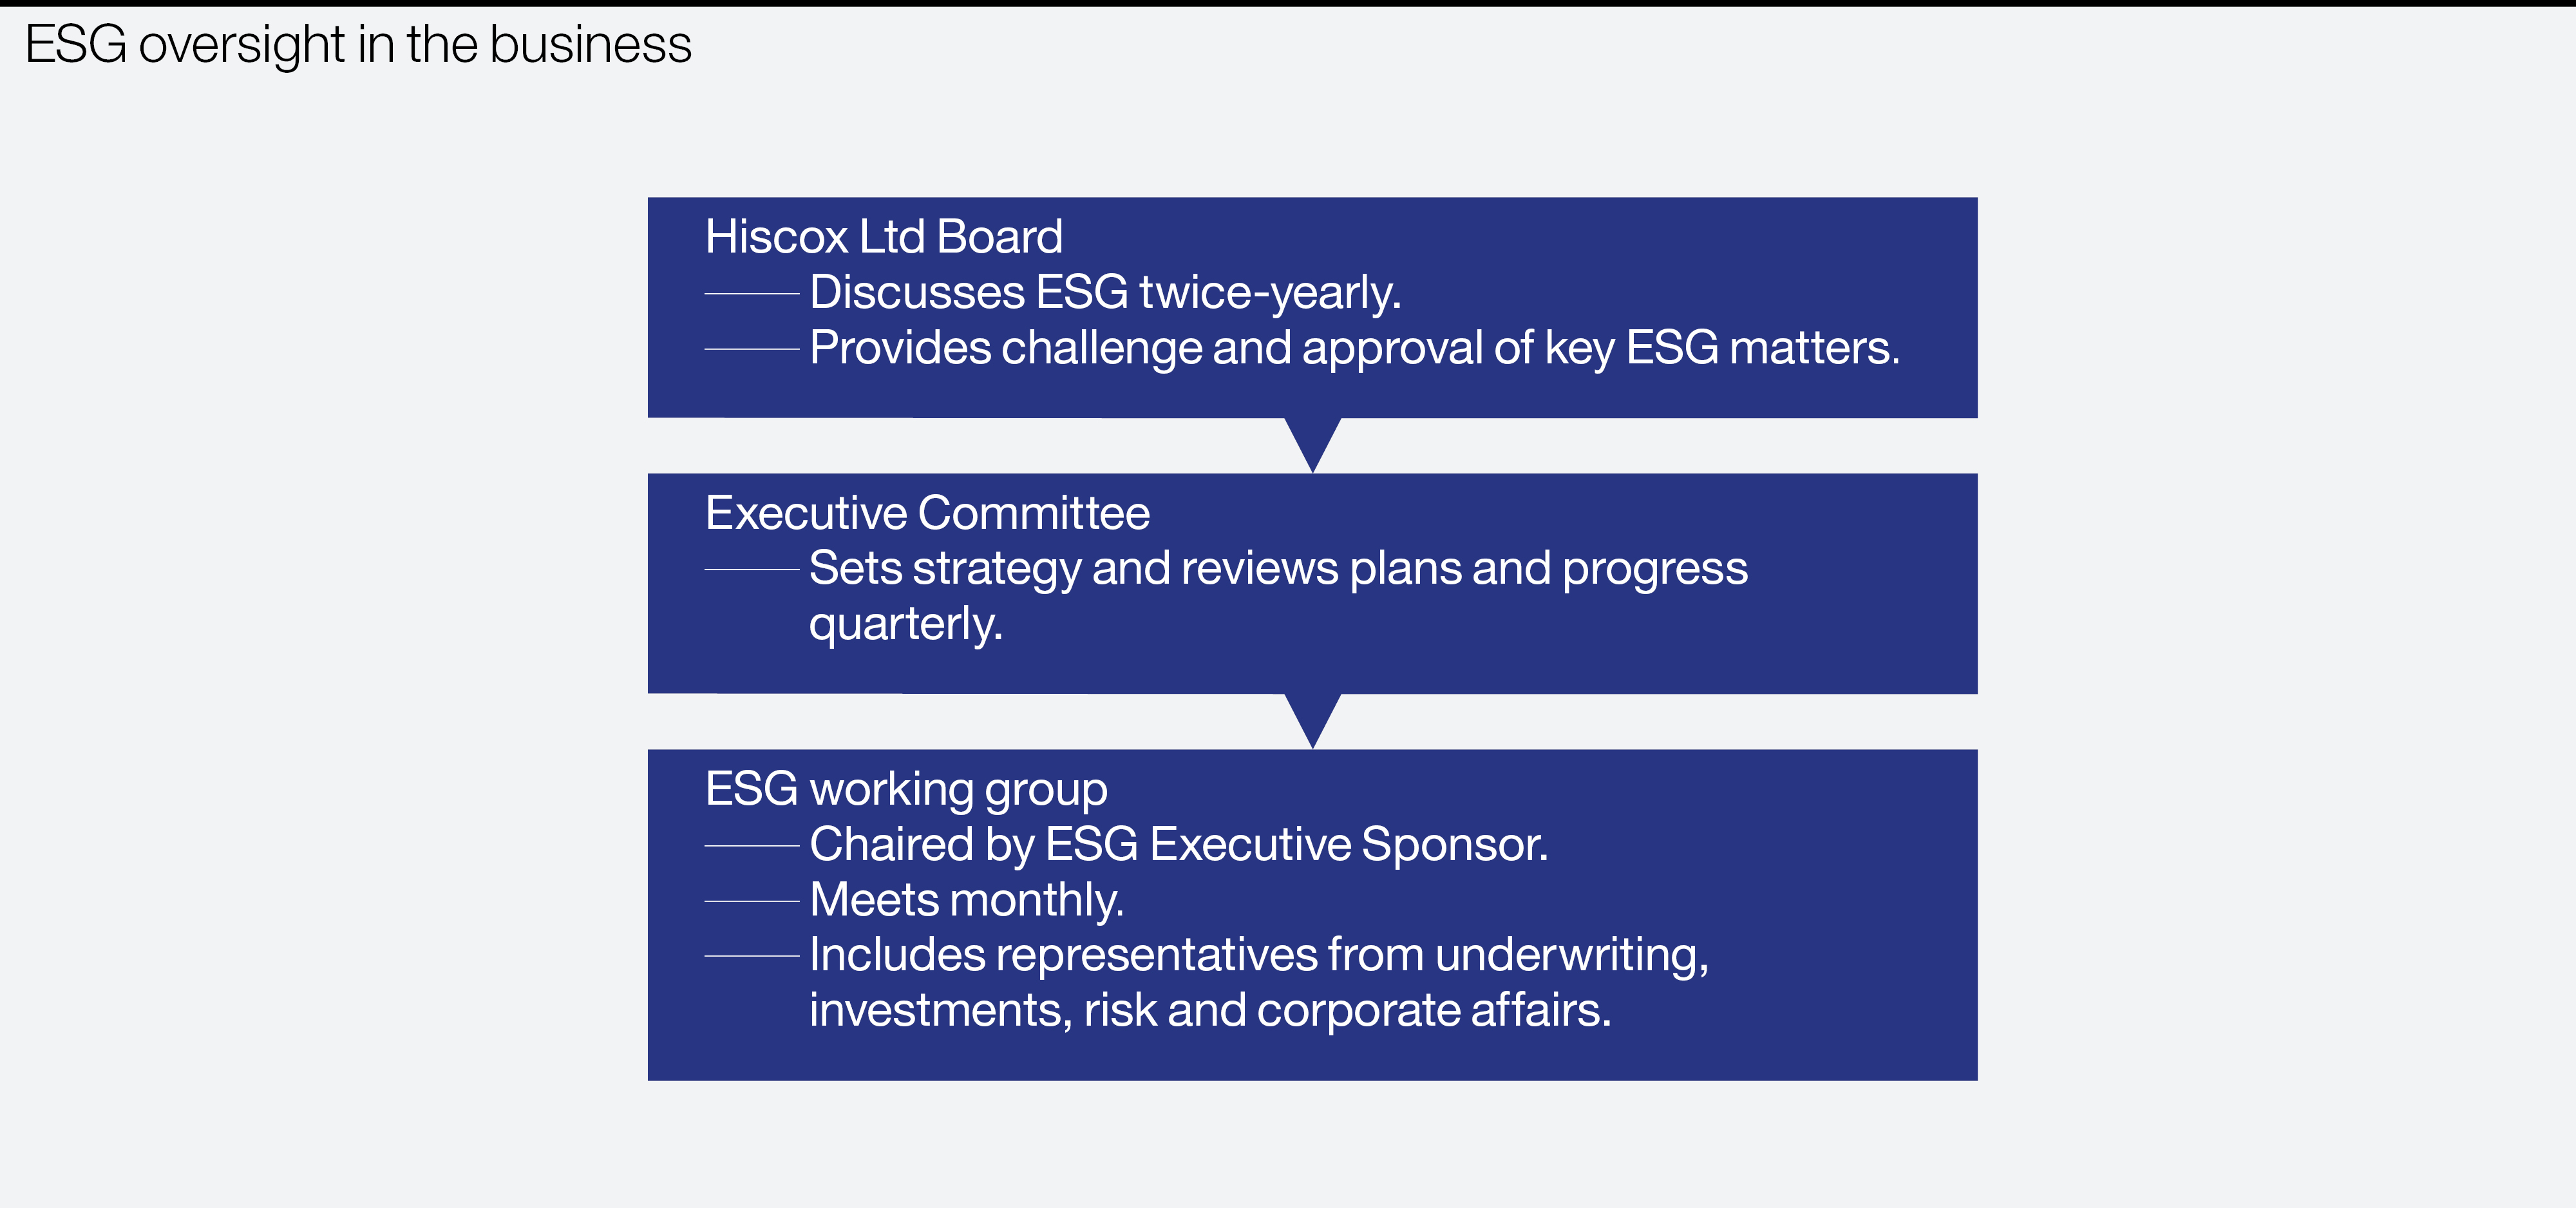 ESG oversight in the business